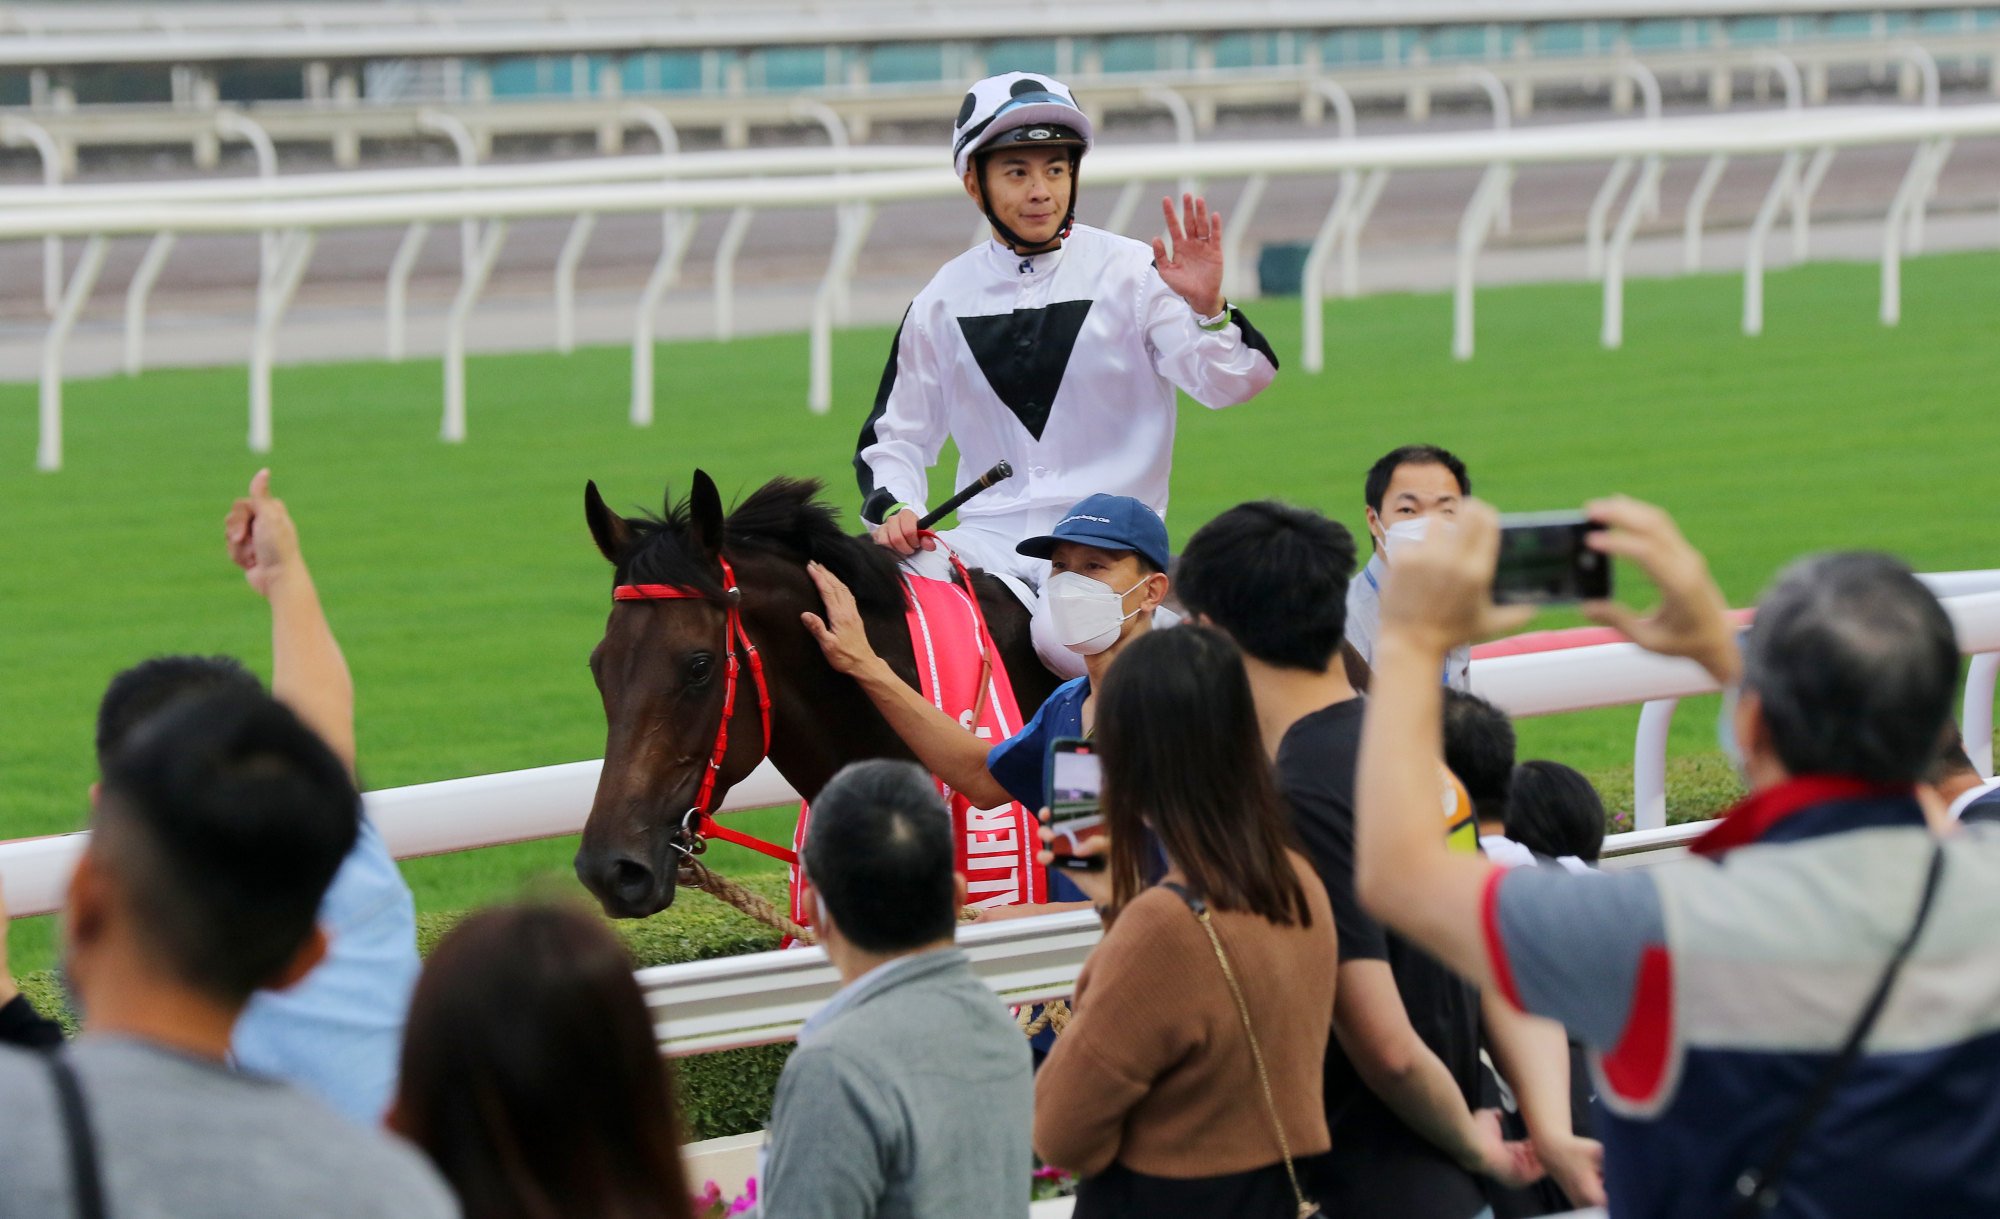 Derek Leung receives the applause of the Sha Tin crowd after winning the Chevalier Cup aboard Keefy last month.